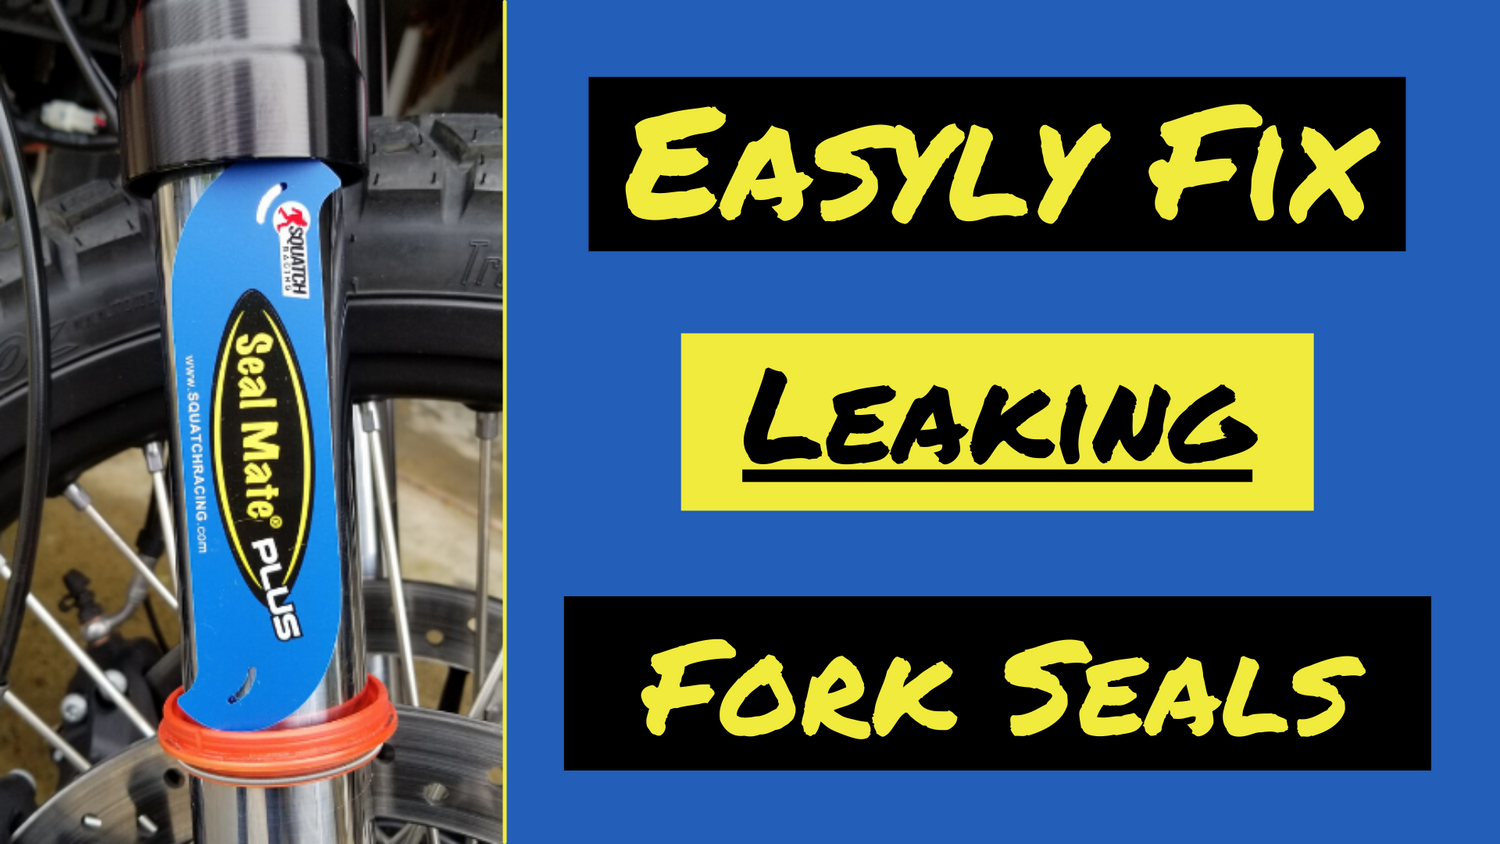 Seal Mate Will Fix Your Leaky Fork Seals Guaranteed!